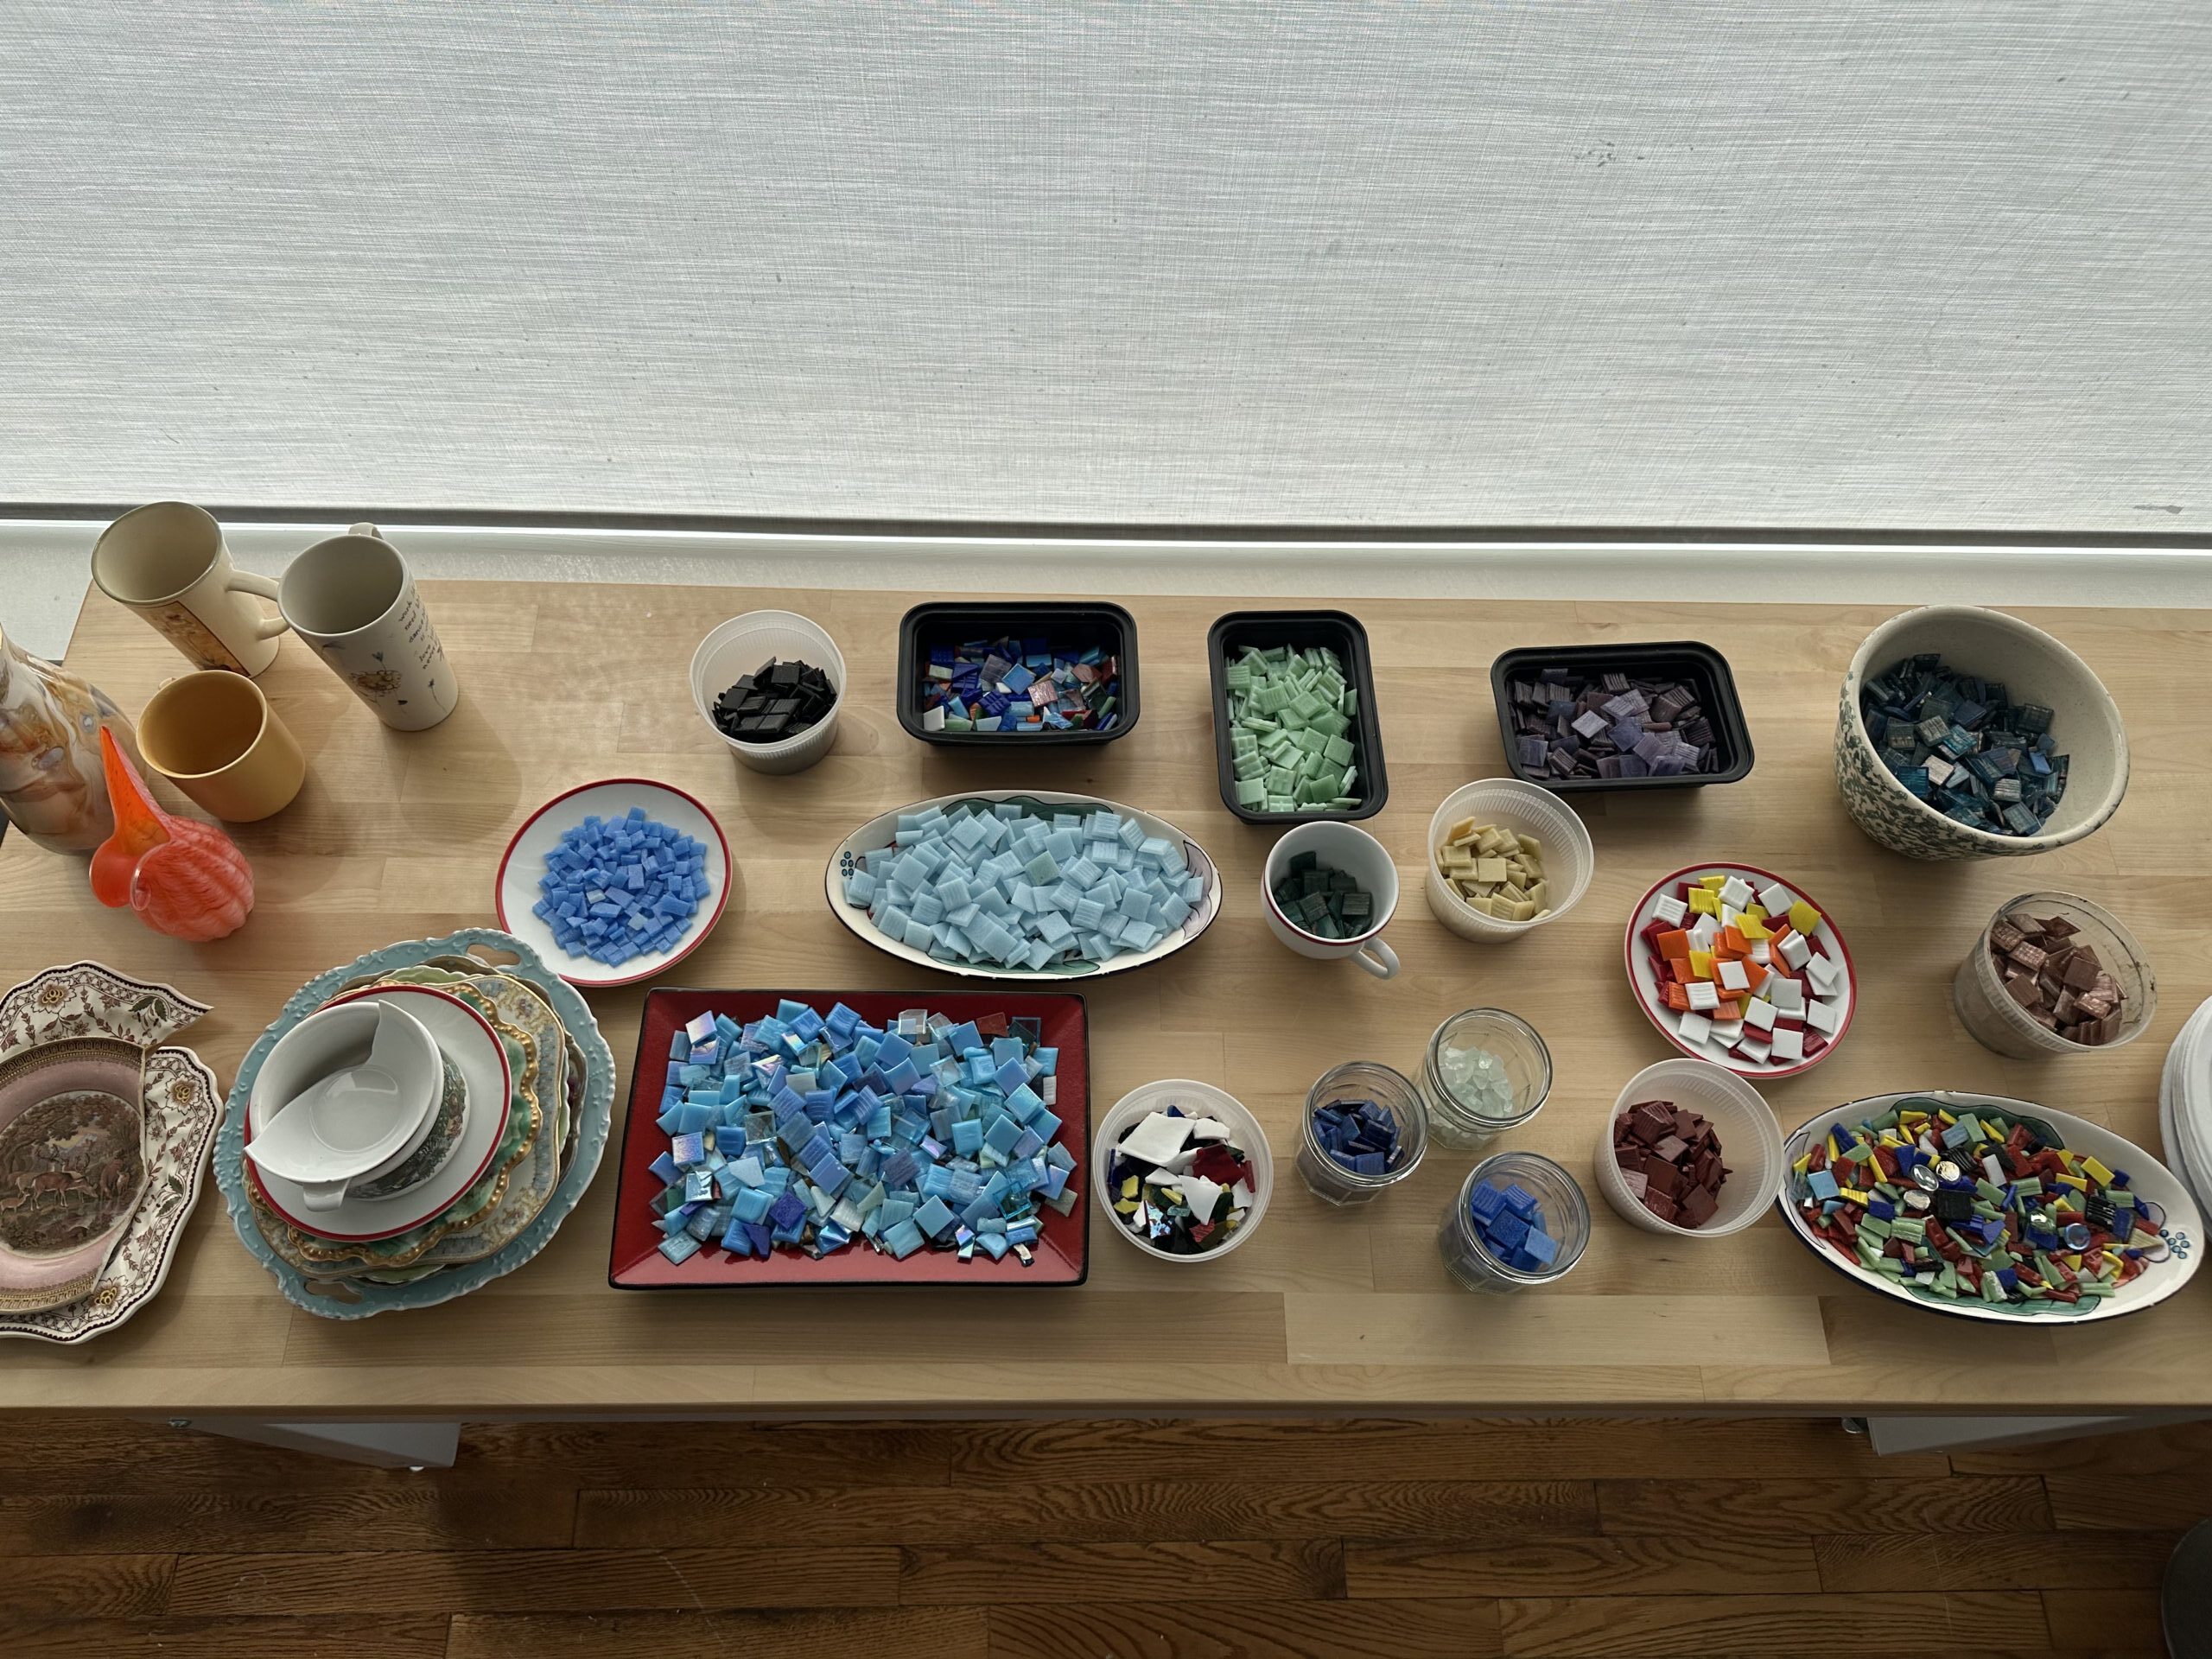 Overhead of table with assortment of jars, dishes, and vessels, many of which are filled with colorful glass tiles for mosaic.